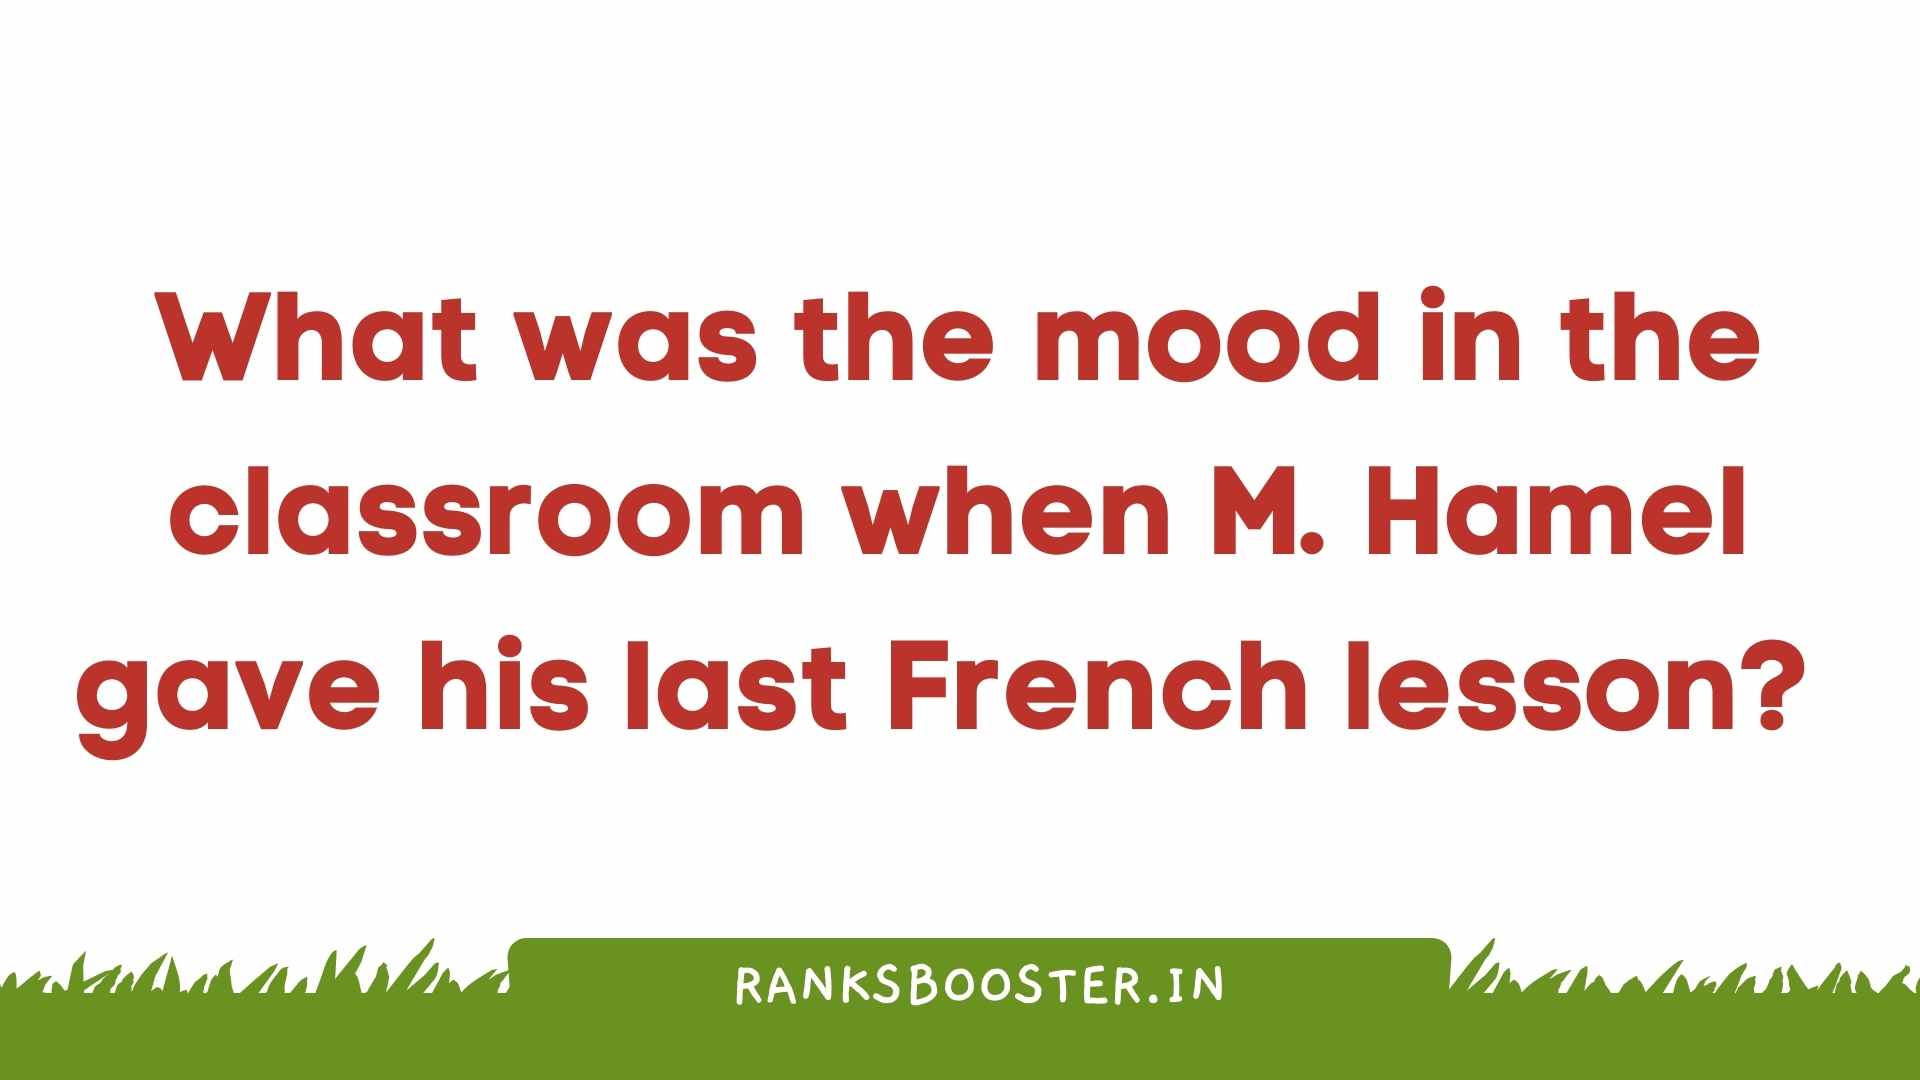 What was the mood in the classroom when M. Hamel gave his last French lesson?